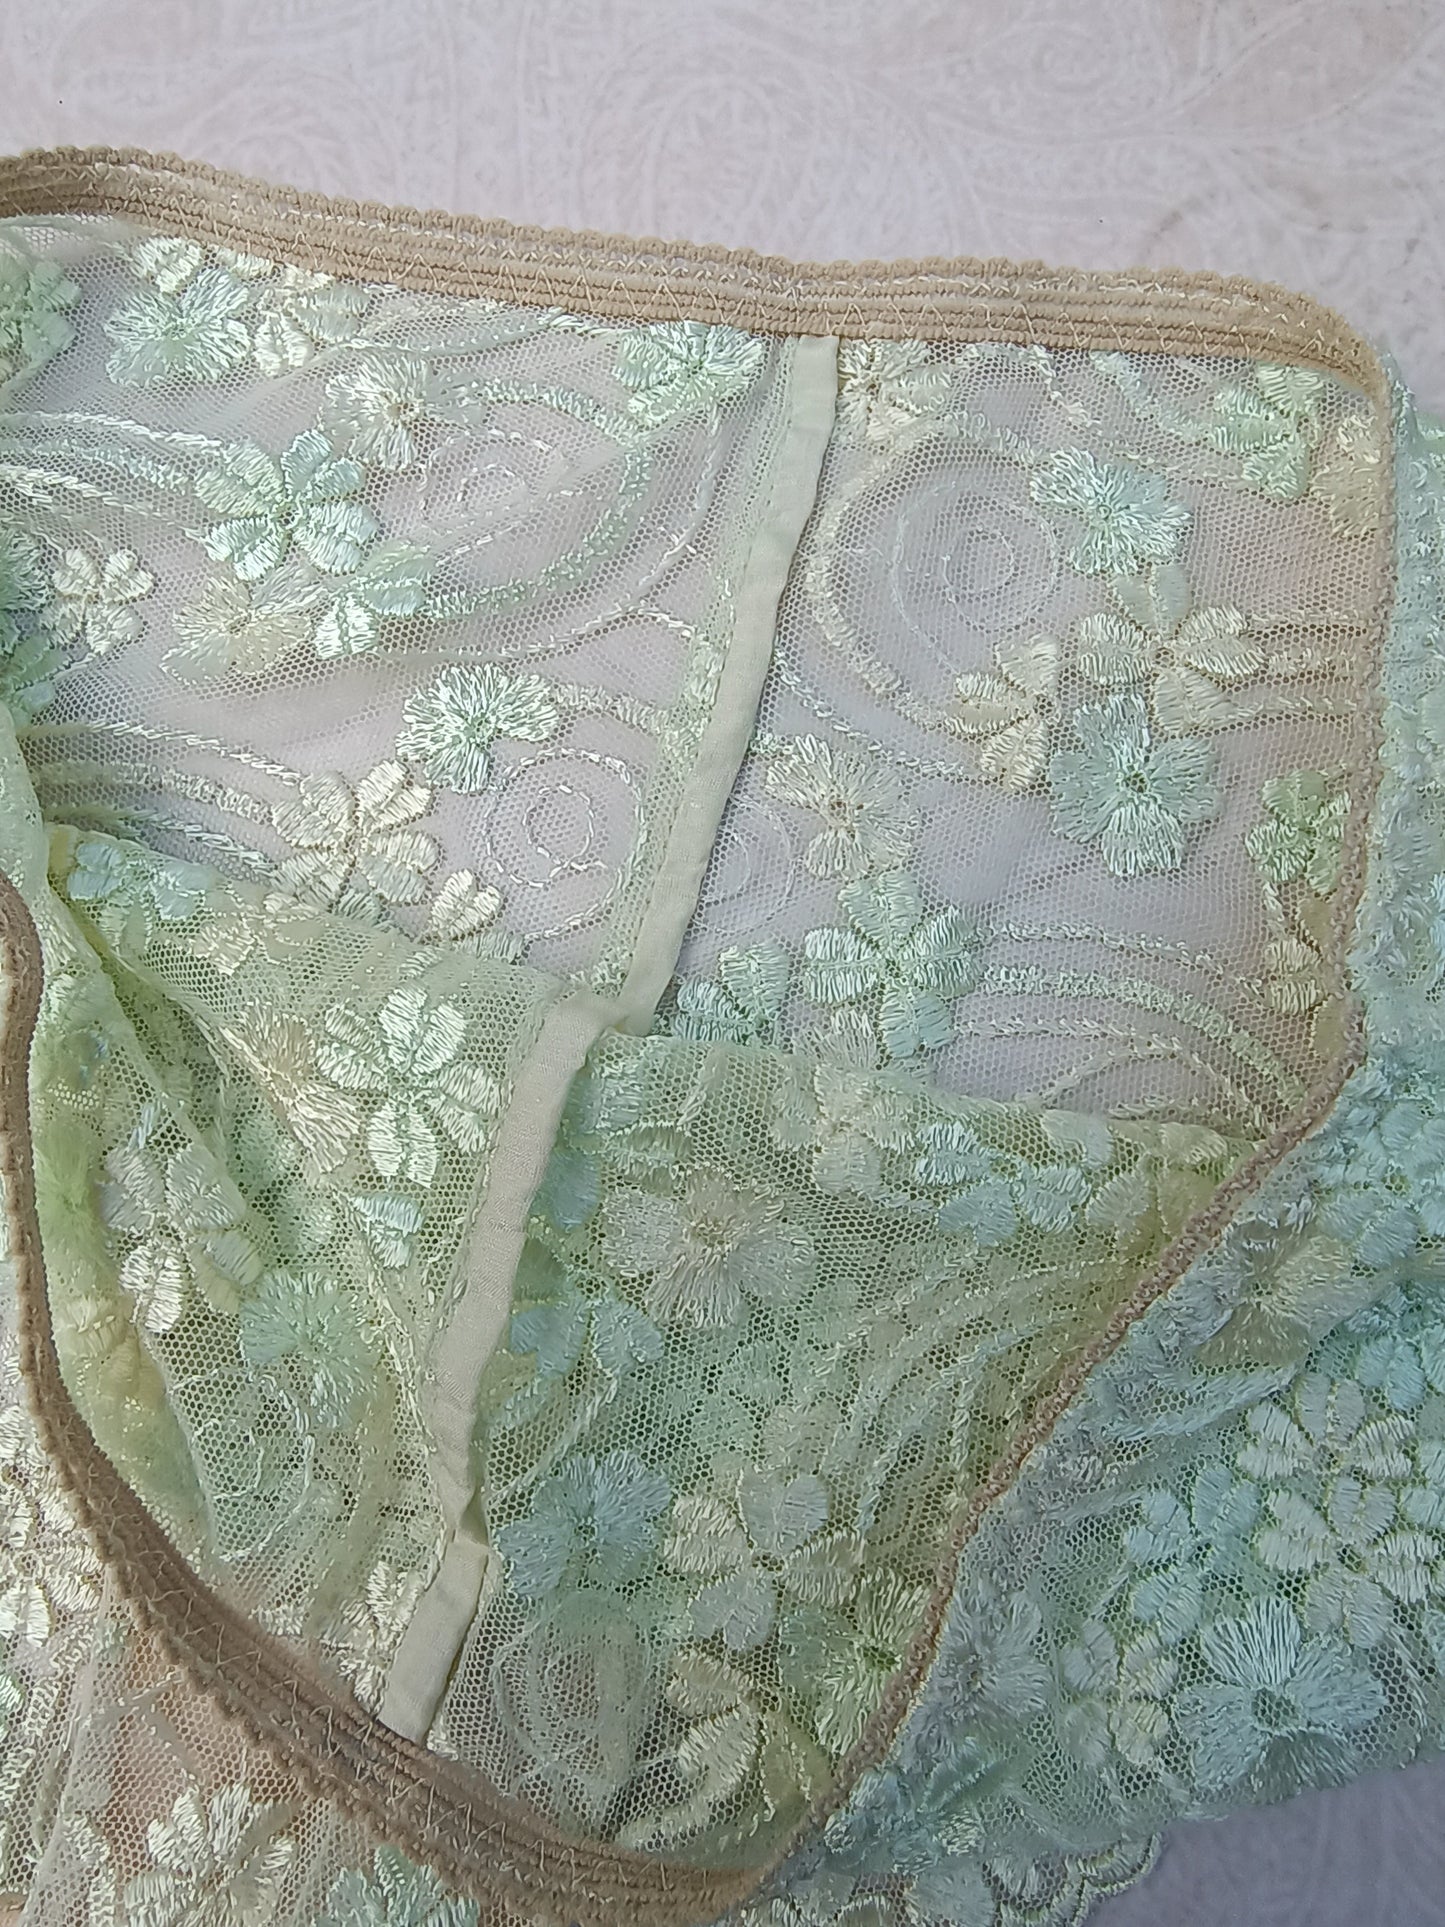 Sample Panties #3 -size XS-S- Perfect Symmetry and Elegance